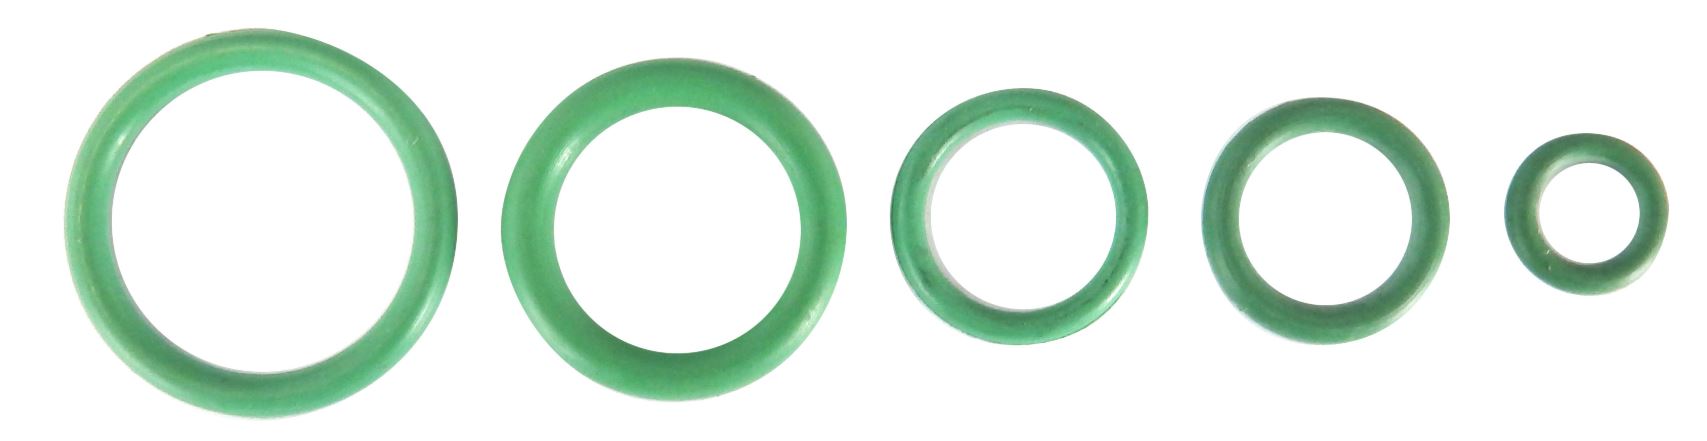 Wot-Nots PWN989 Air Con O Rings Assorted